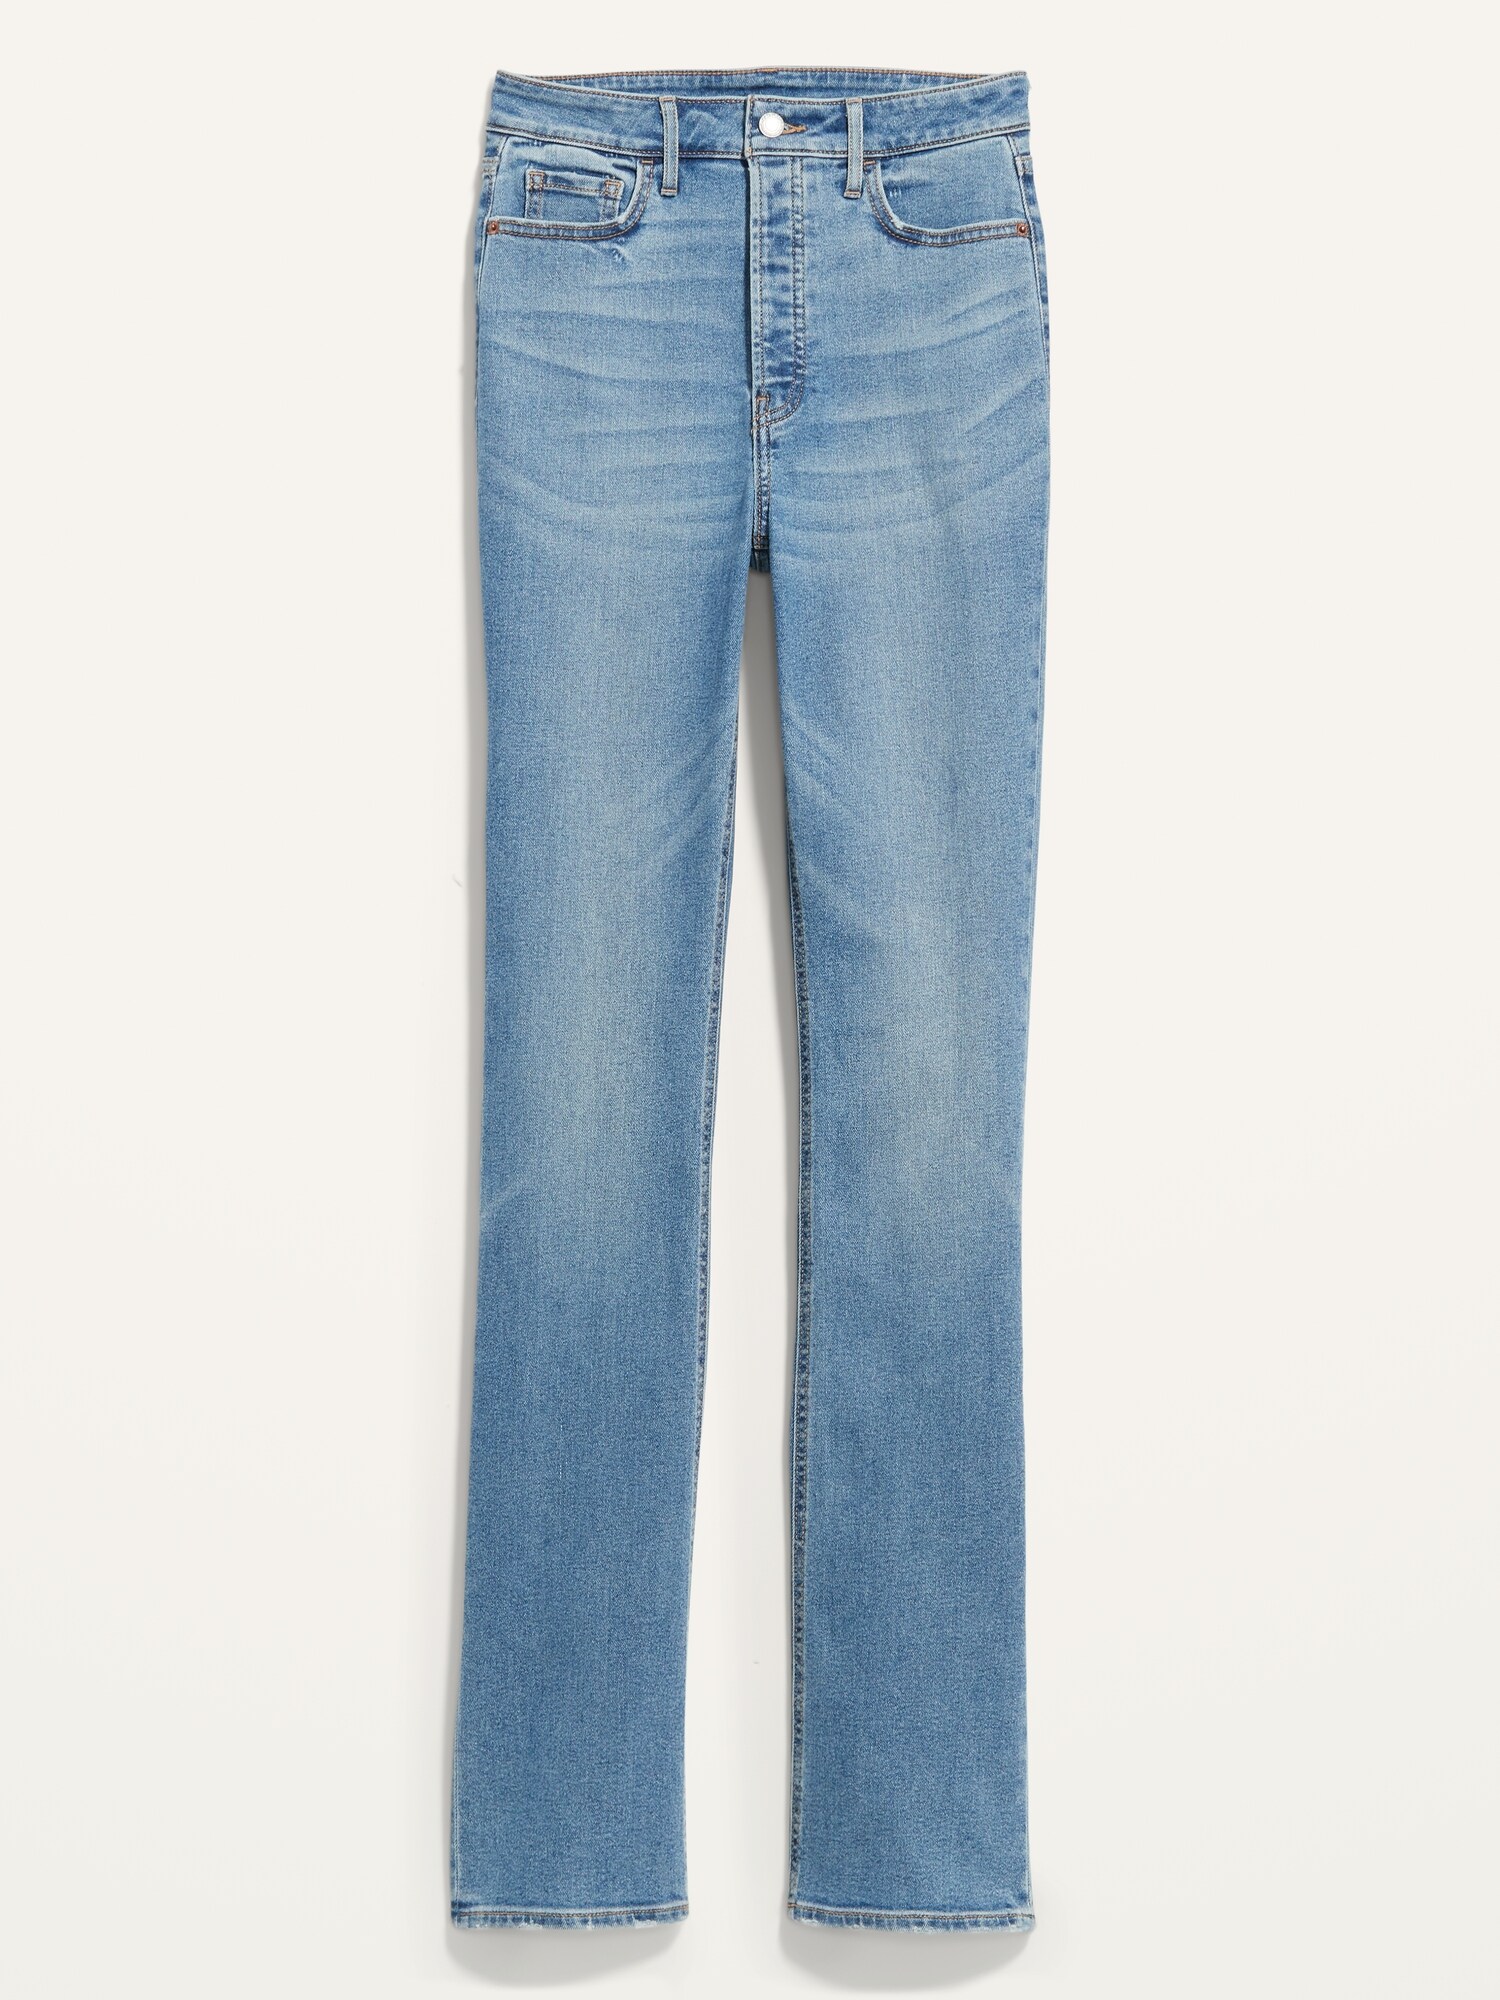 Extra High-Waisted Button-Fly Kicker Boot-Cut Jeans